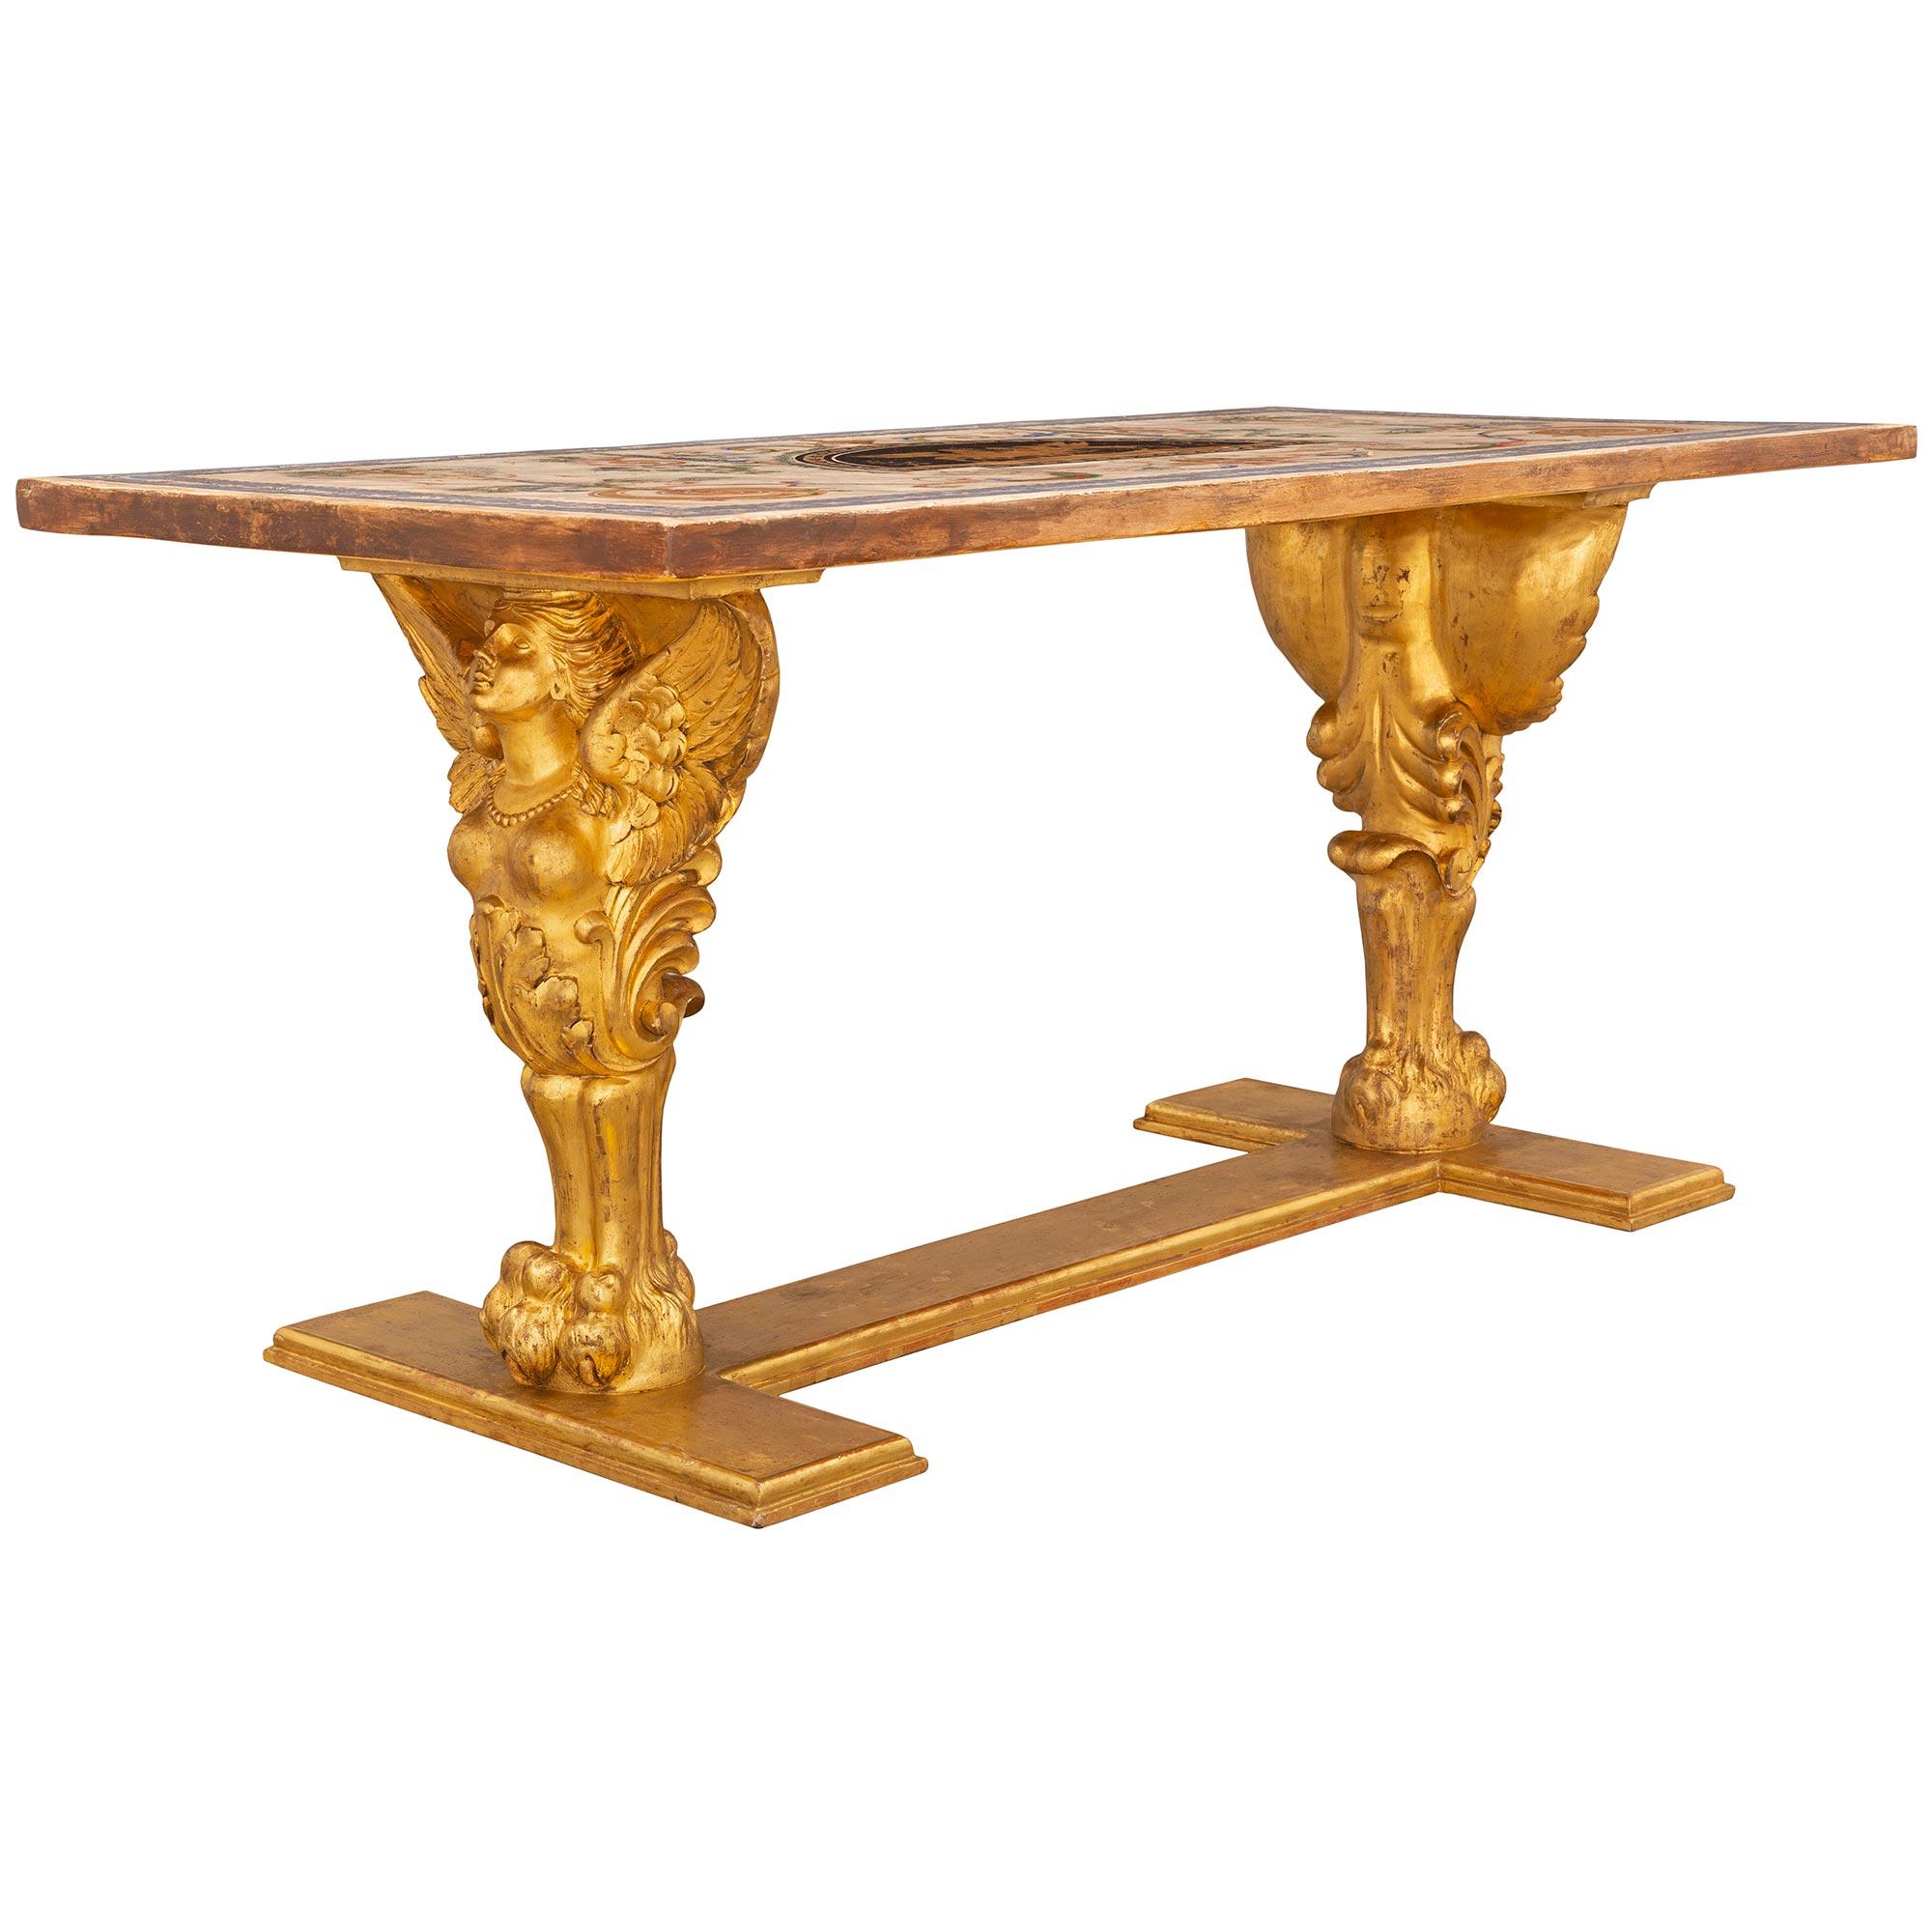 Scagliola Italian Early 19th Century Neo Classical St. Cocktail or Coffee Table For Sale